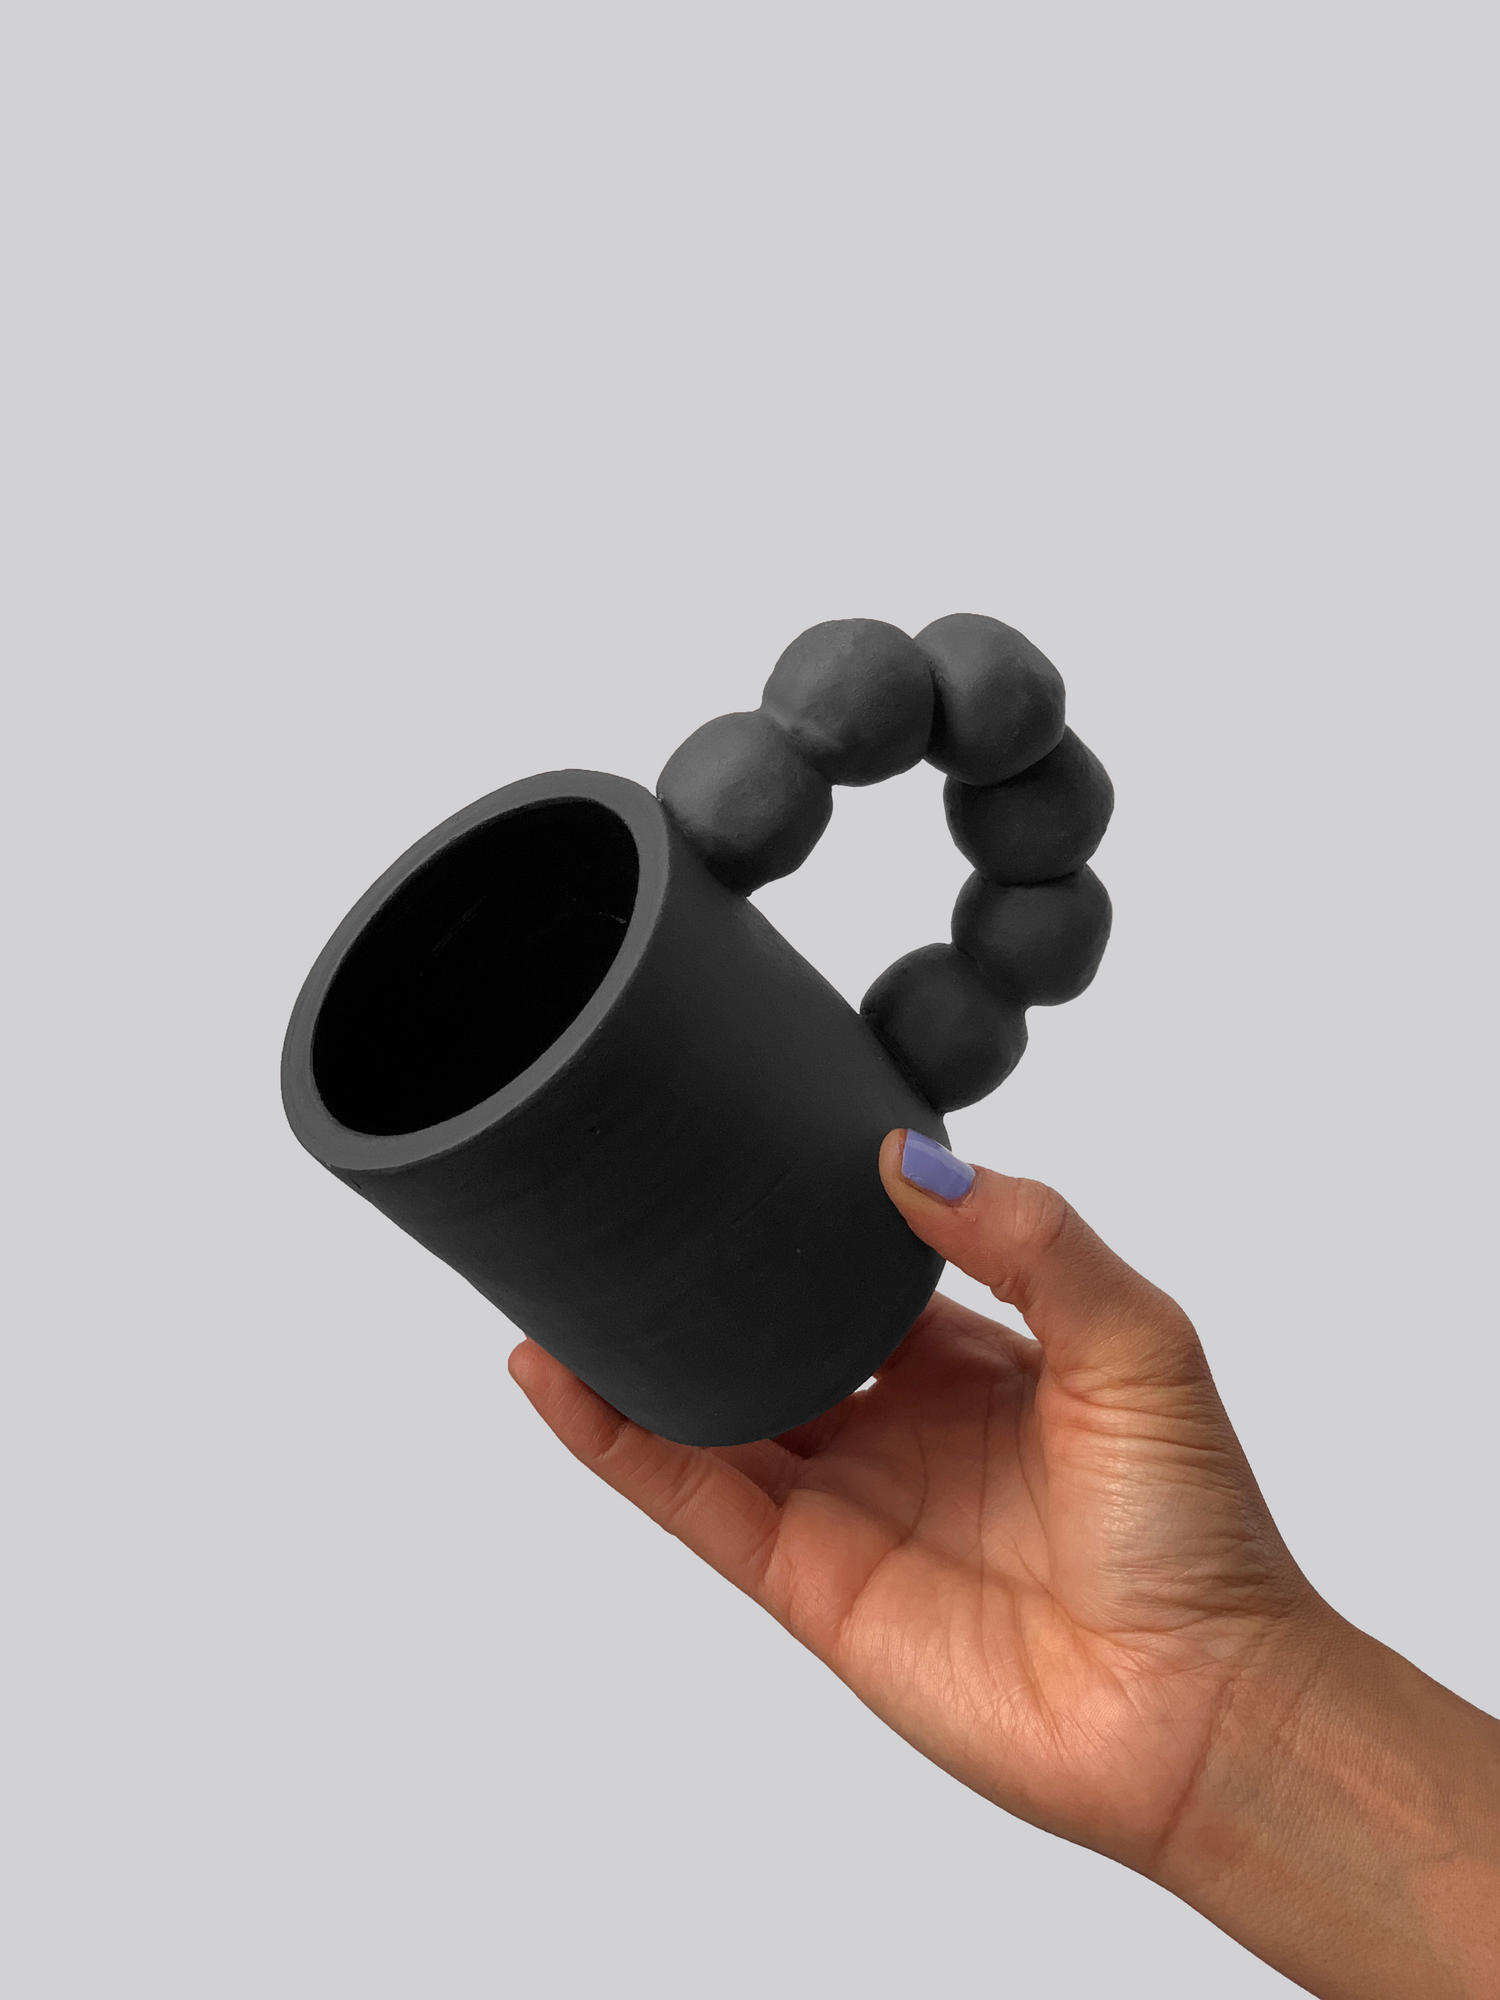 Black matte stoneware ceramic mug with six connected balls forming the handle.